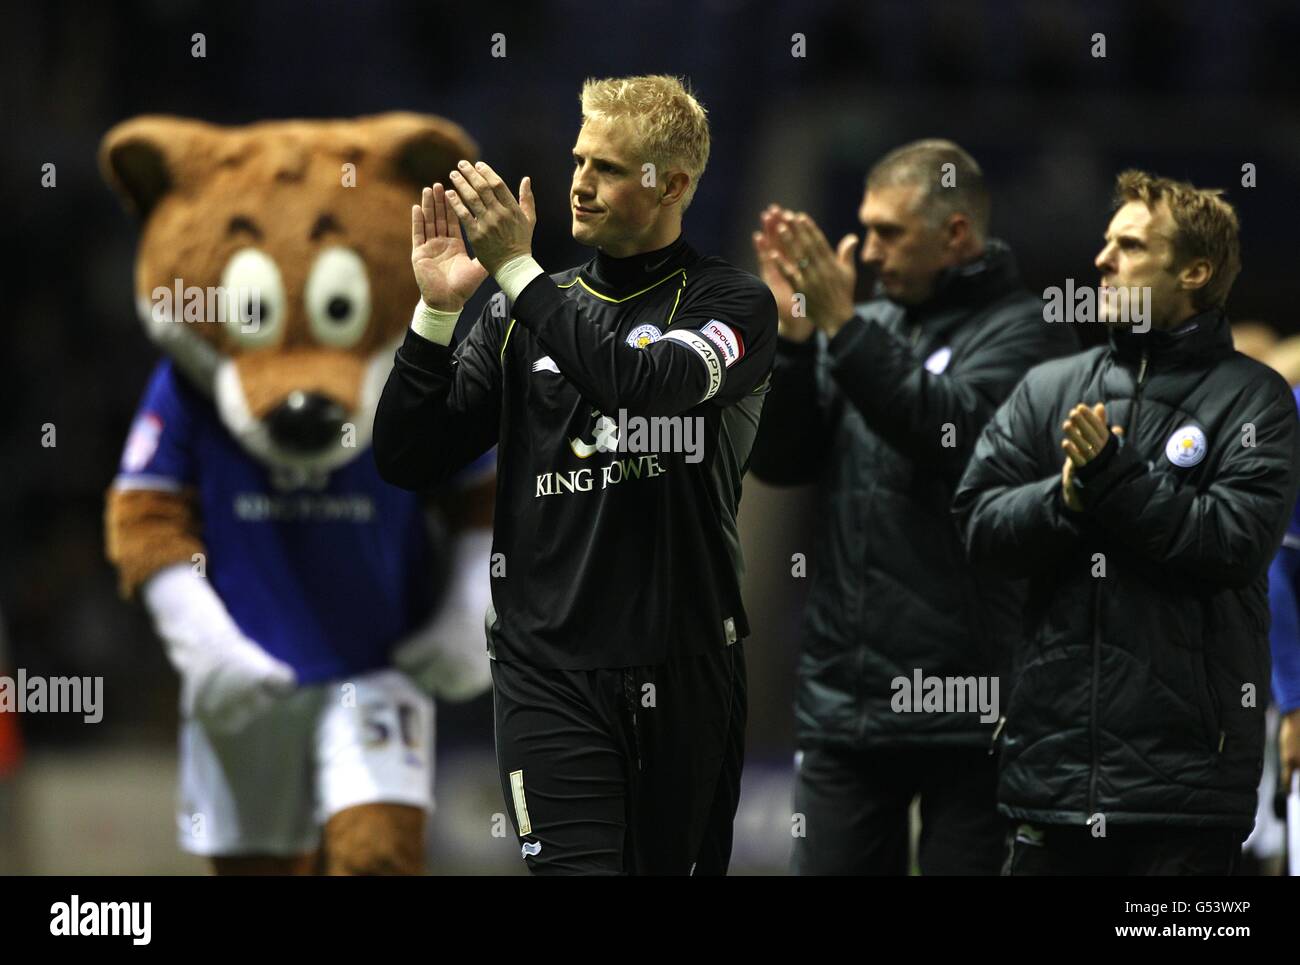 Leicester City goalkeeper Kasper Schmeichel joins mascot Filbert Fox (left) and manager Nigel Pearson (2nd right) in applauding the home fans as they do a lap of the pitch on their final home game of the season Stock Photo